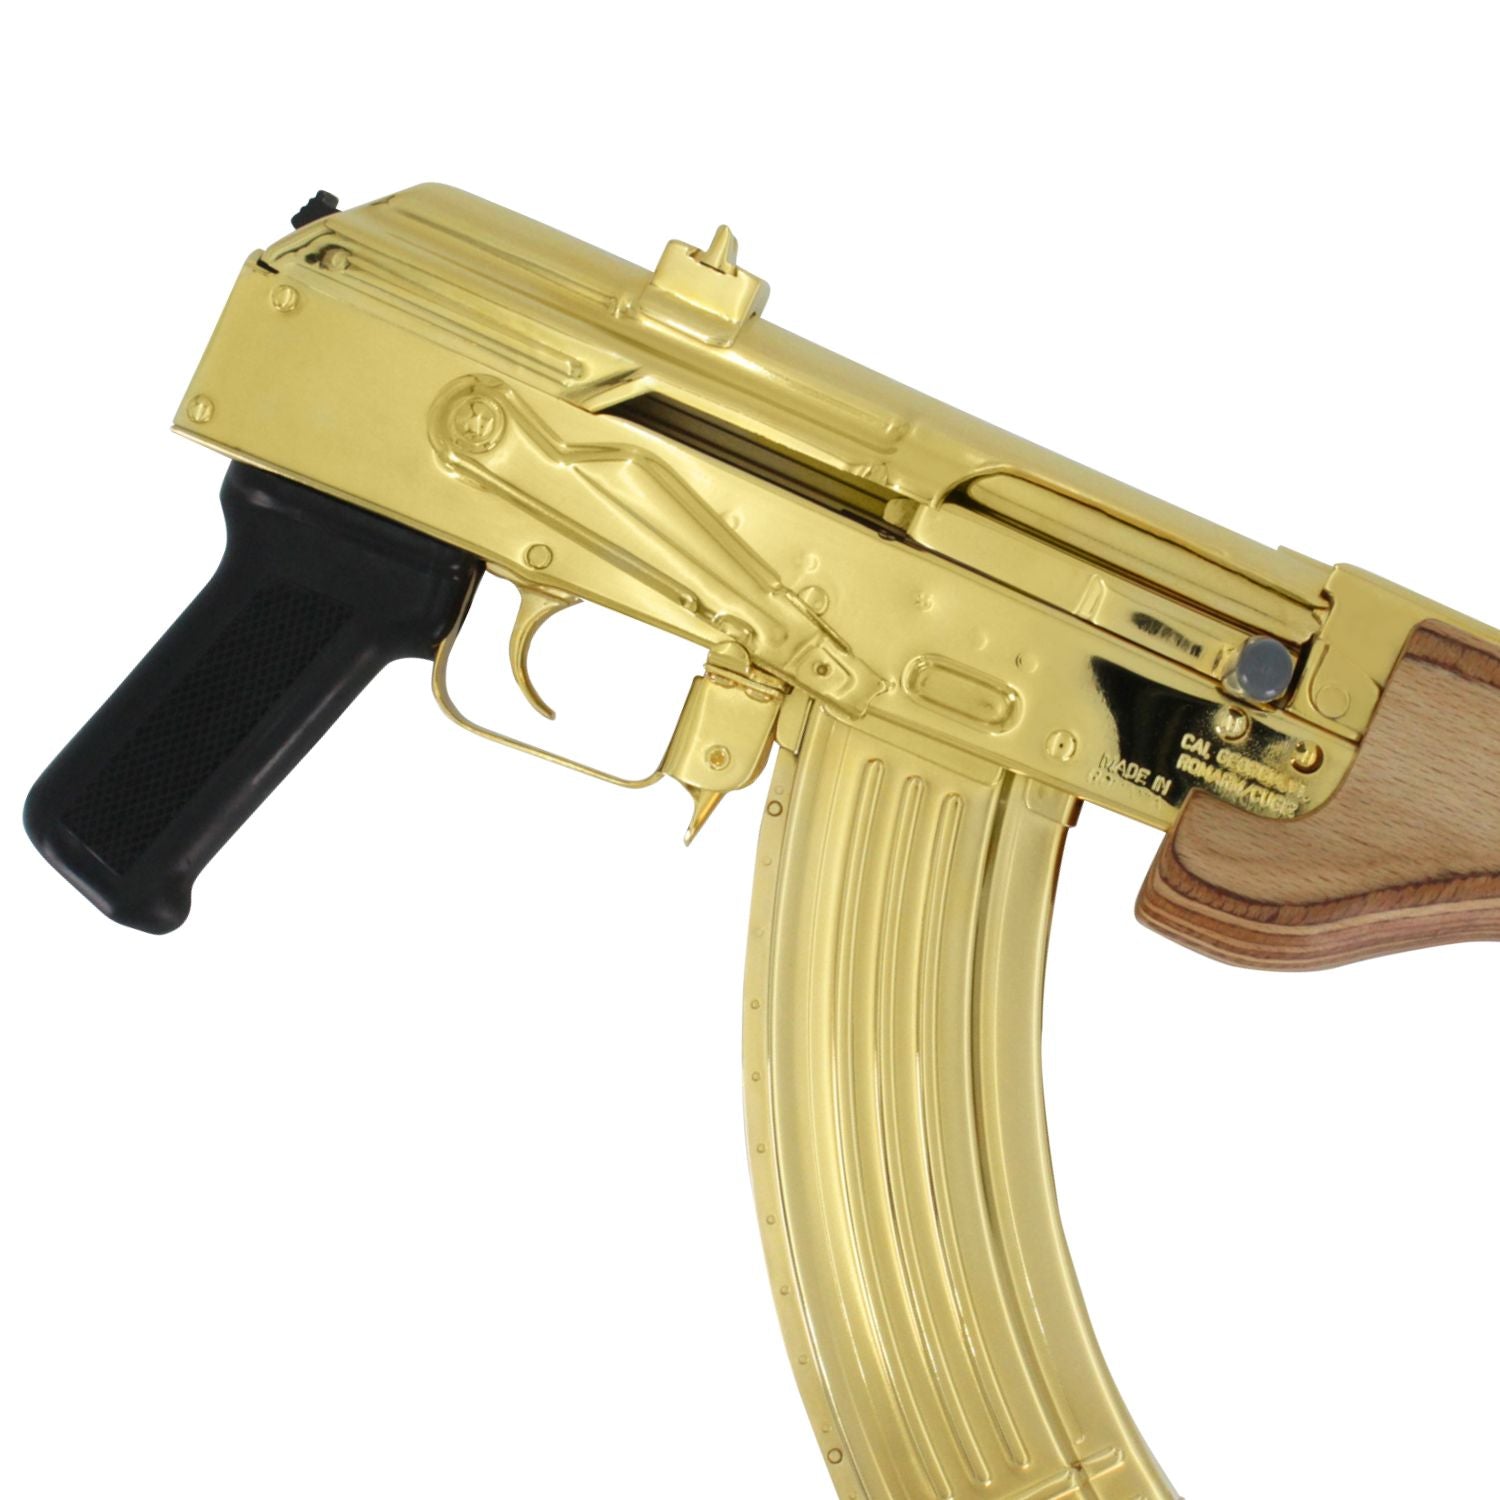 Century Arms Micro Draco, 7.62 X 39mm, 24k Gold Plated With 24k Gold Plated Magazine, SKU: 6781534470246